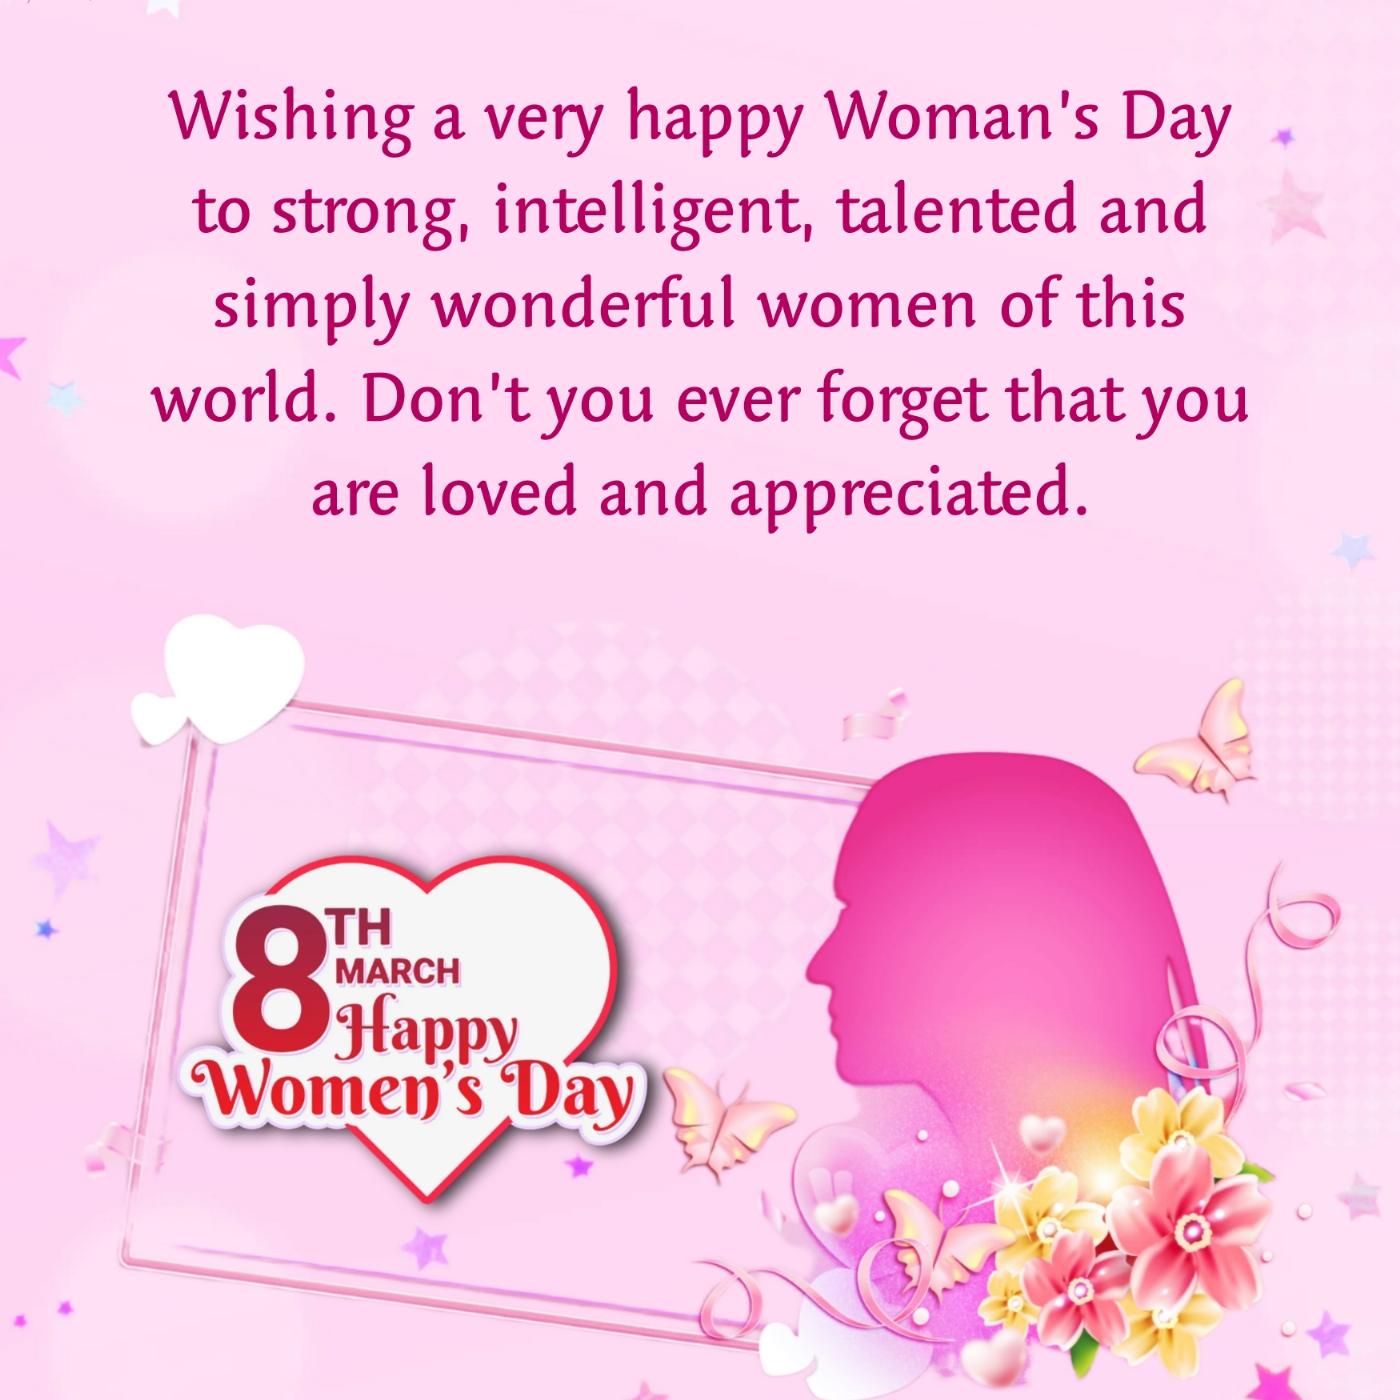 Wishing a very happy Womans Day to strong intelligent